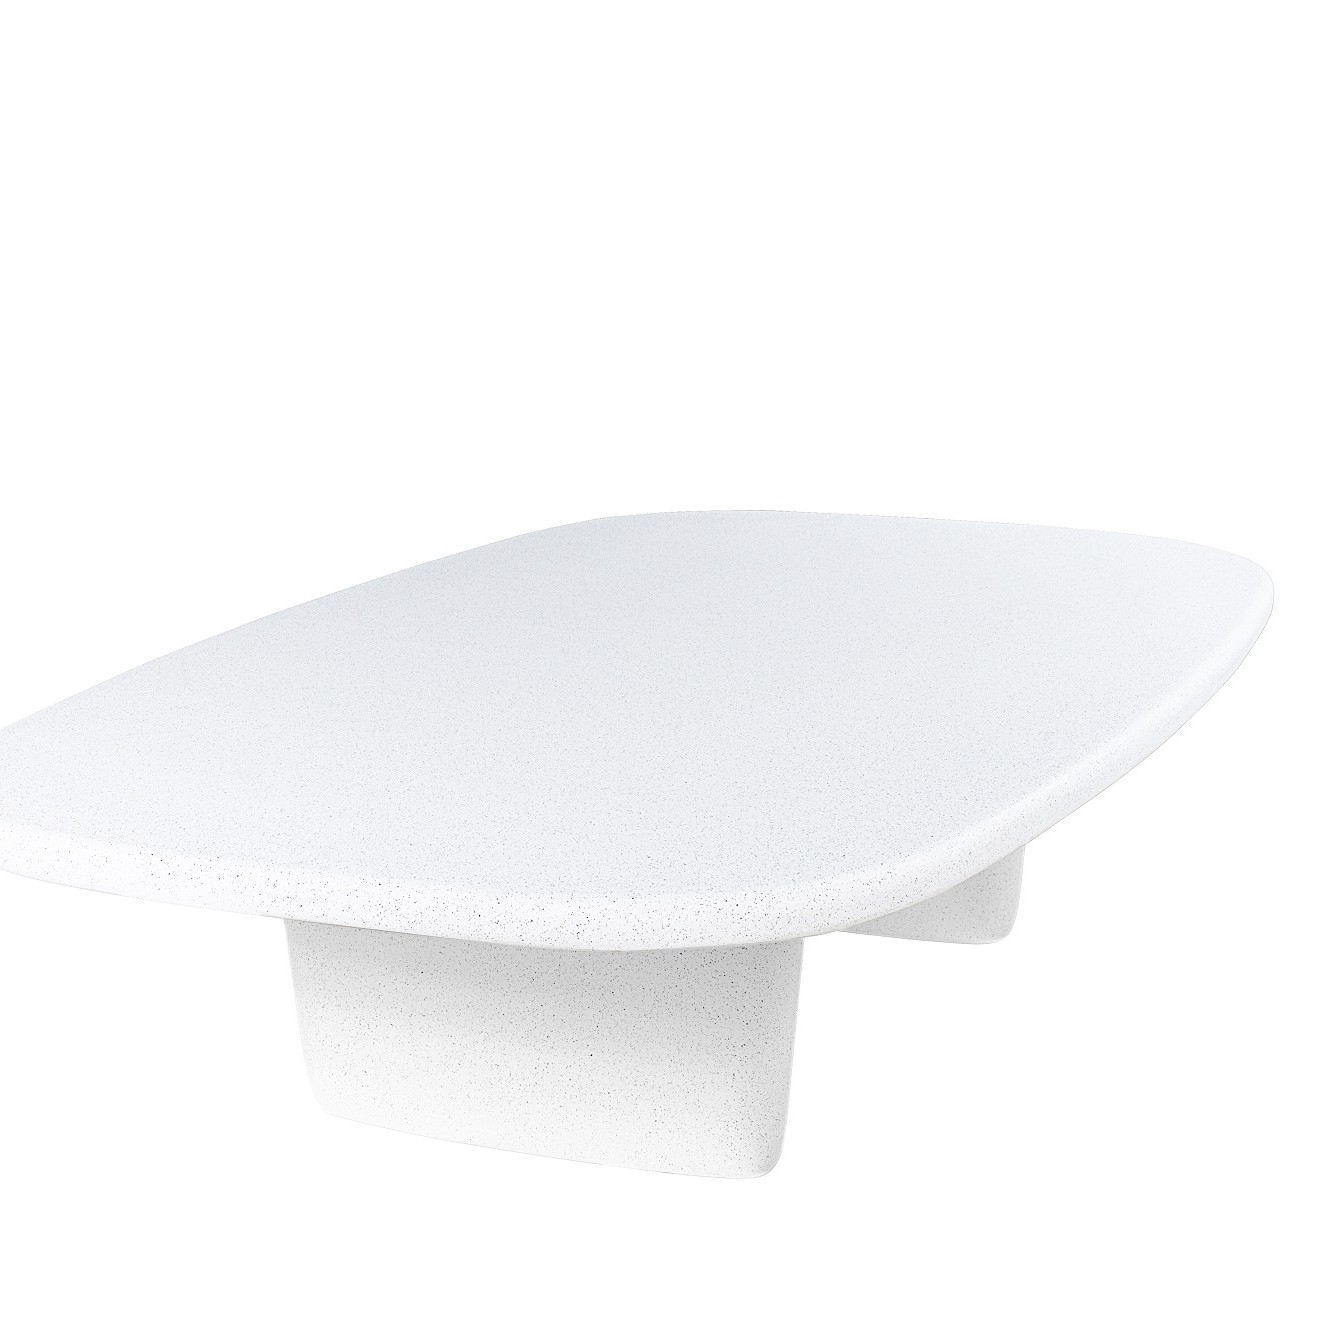 Mes ivory concrete coffee table by Urbi et orbi i low res